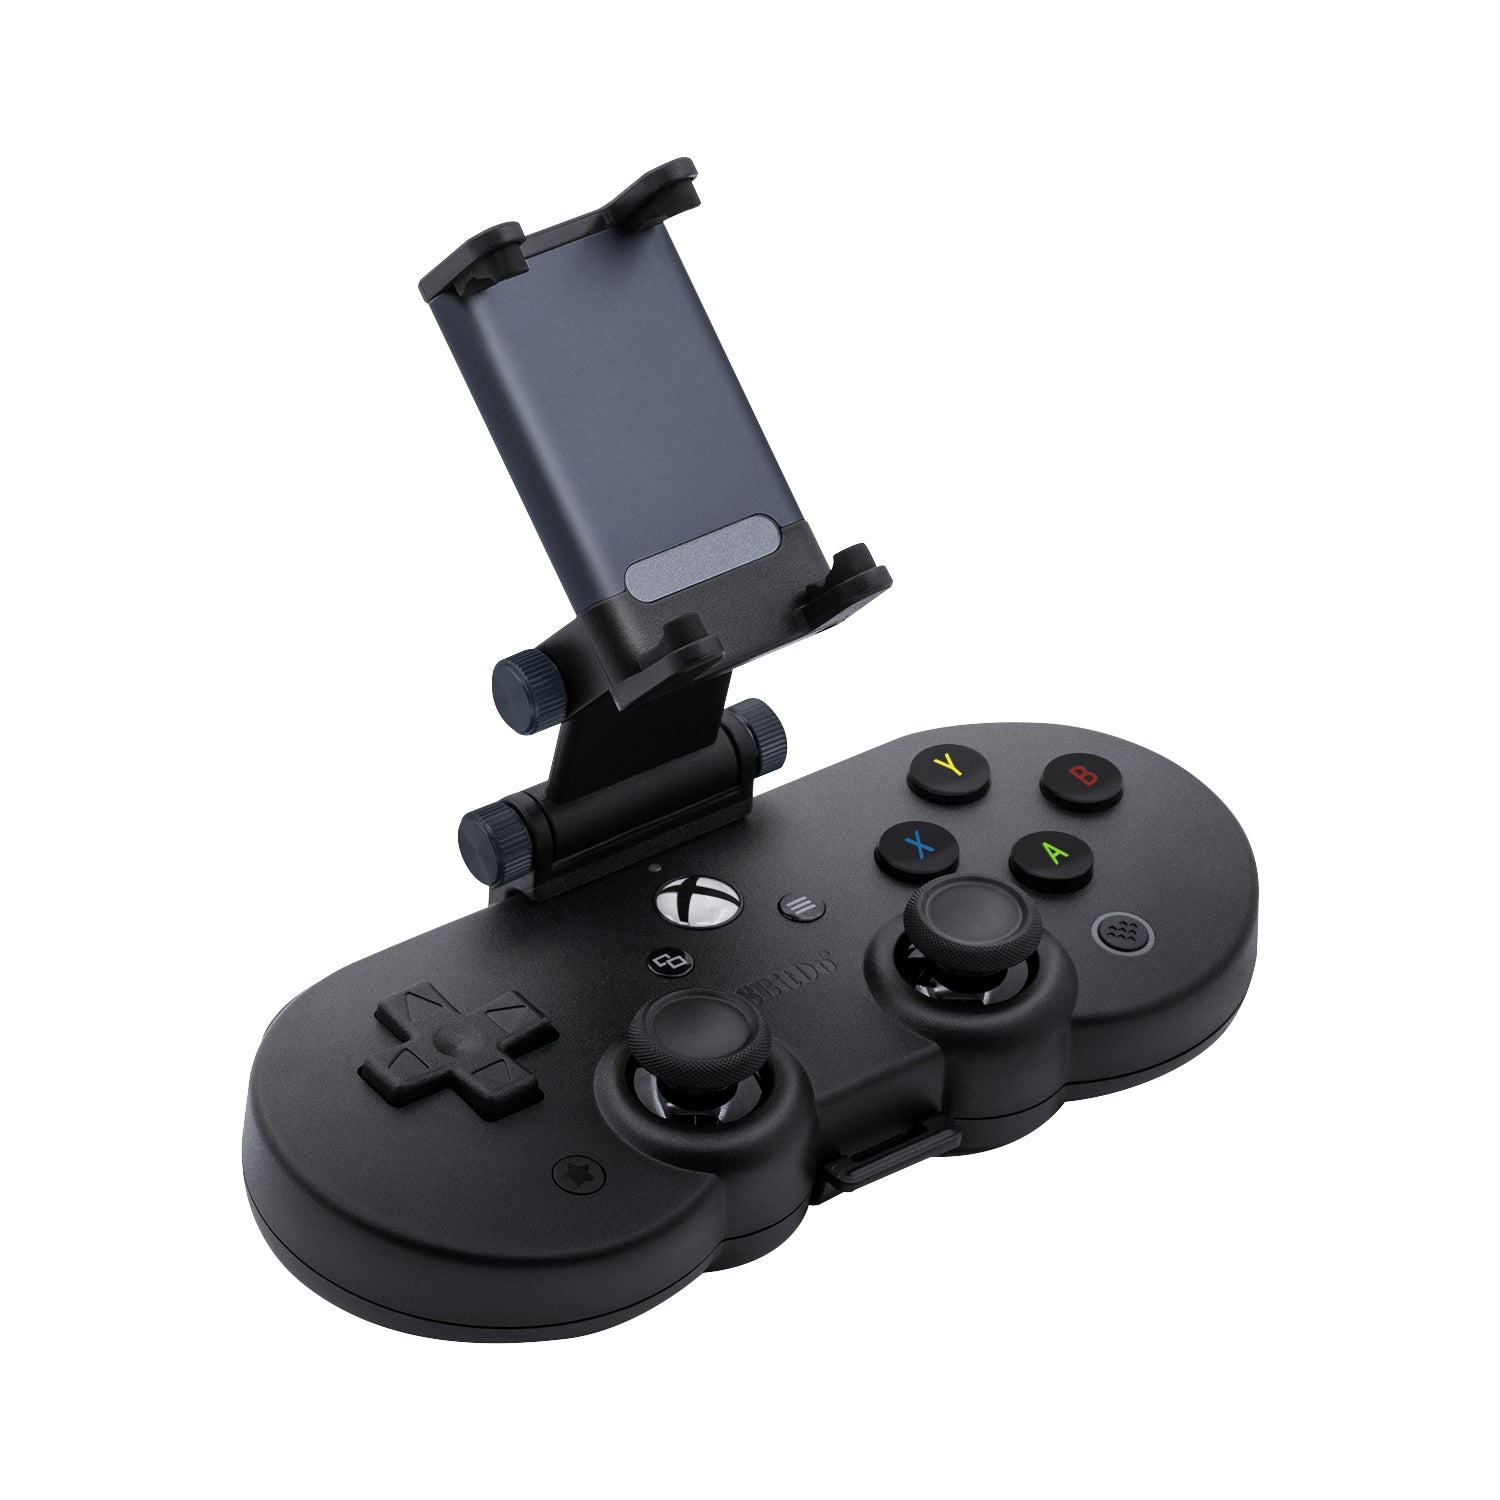 8BitDo SN30 Pro Bluetooth Controller for Android + Clip 